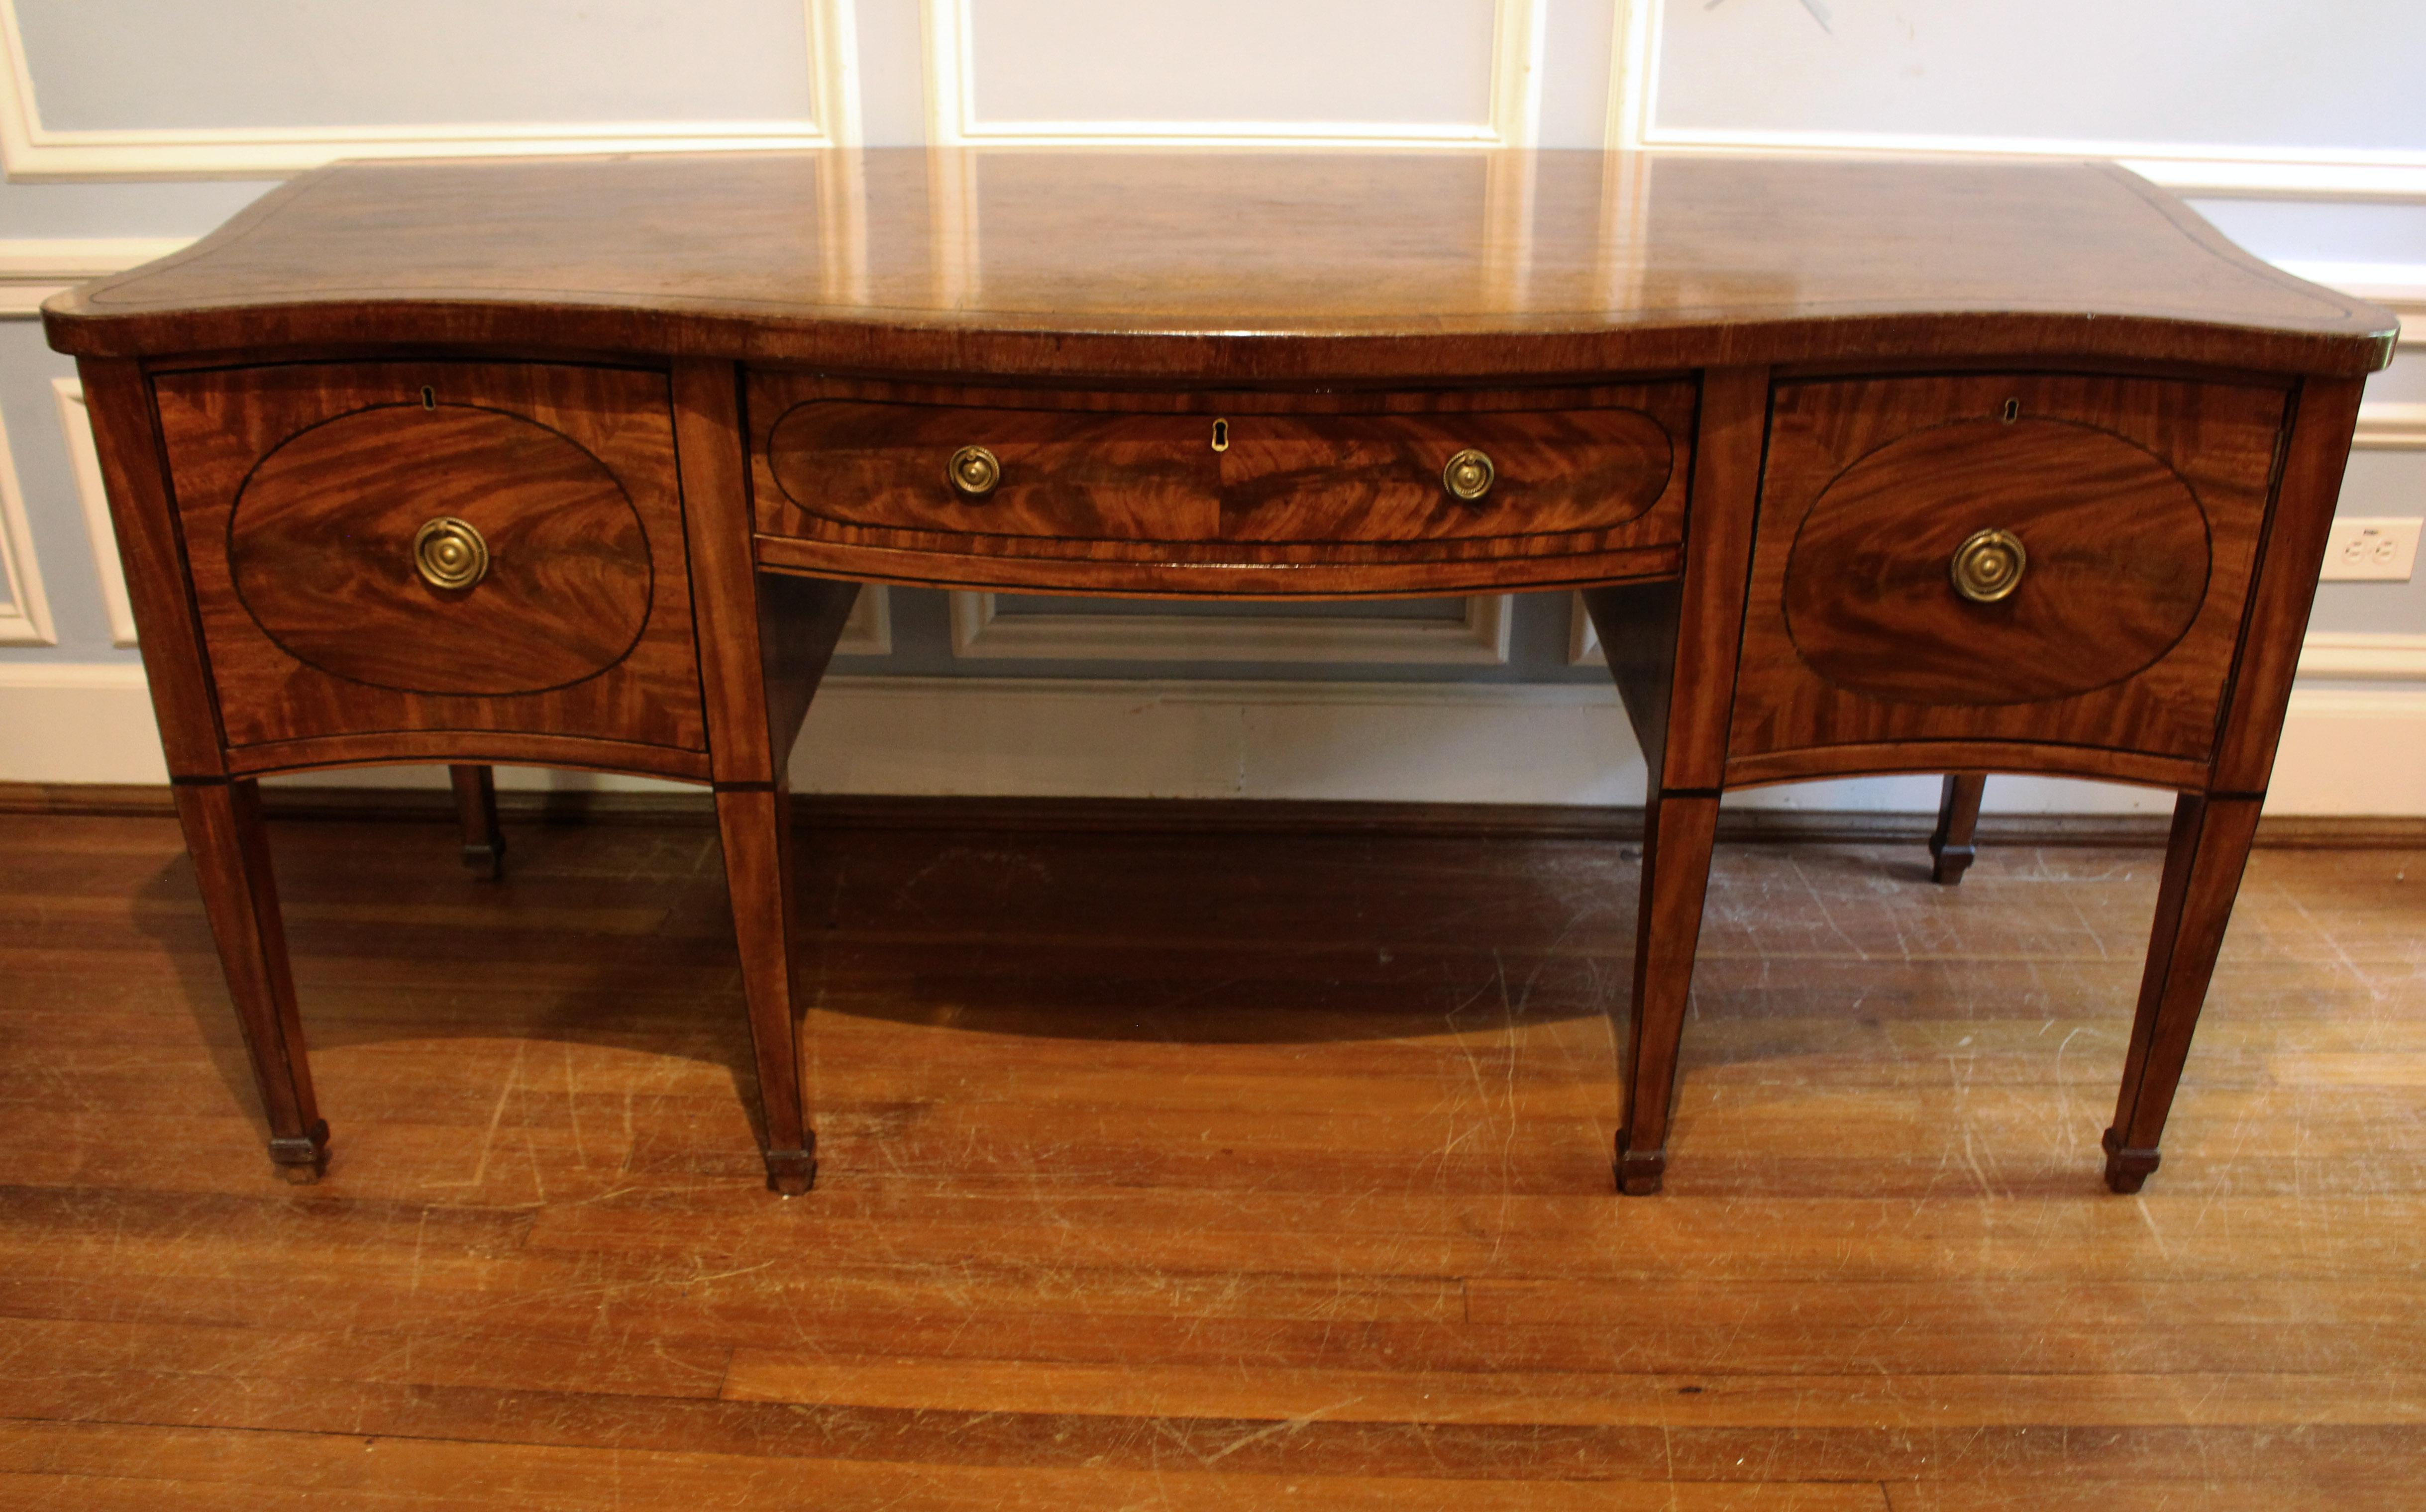 Late 18th to early 19th century serpentine form sideboard, English, George III period. Mahogany with oak secondary wood. The figure of the mahogany put to excellent use particularly on the drawer fronts. Ebony line inlays outline & accent the whole.